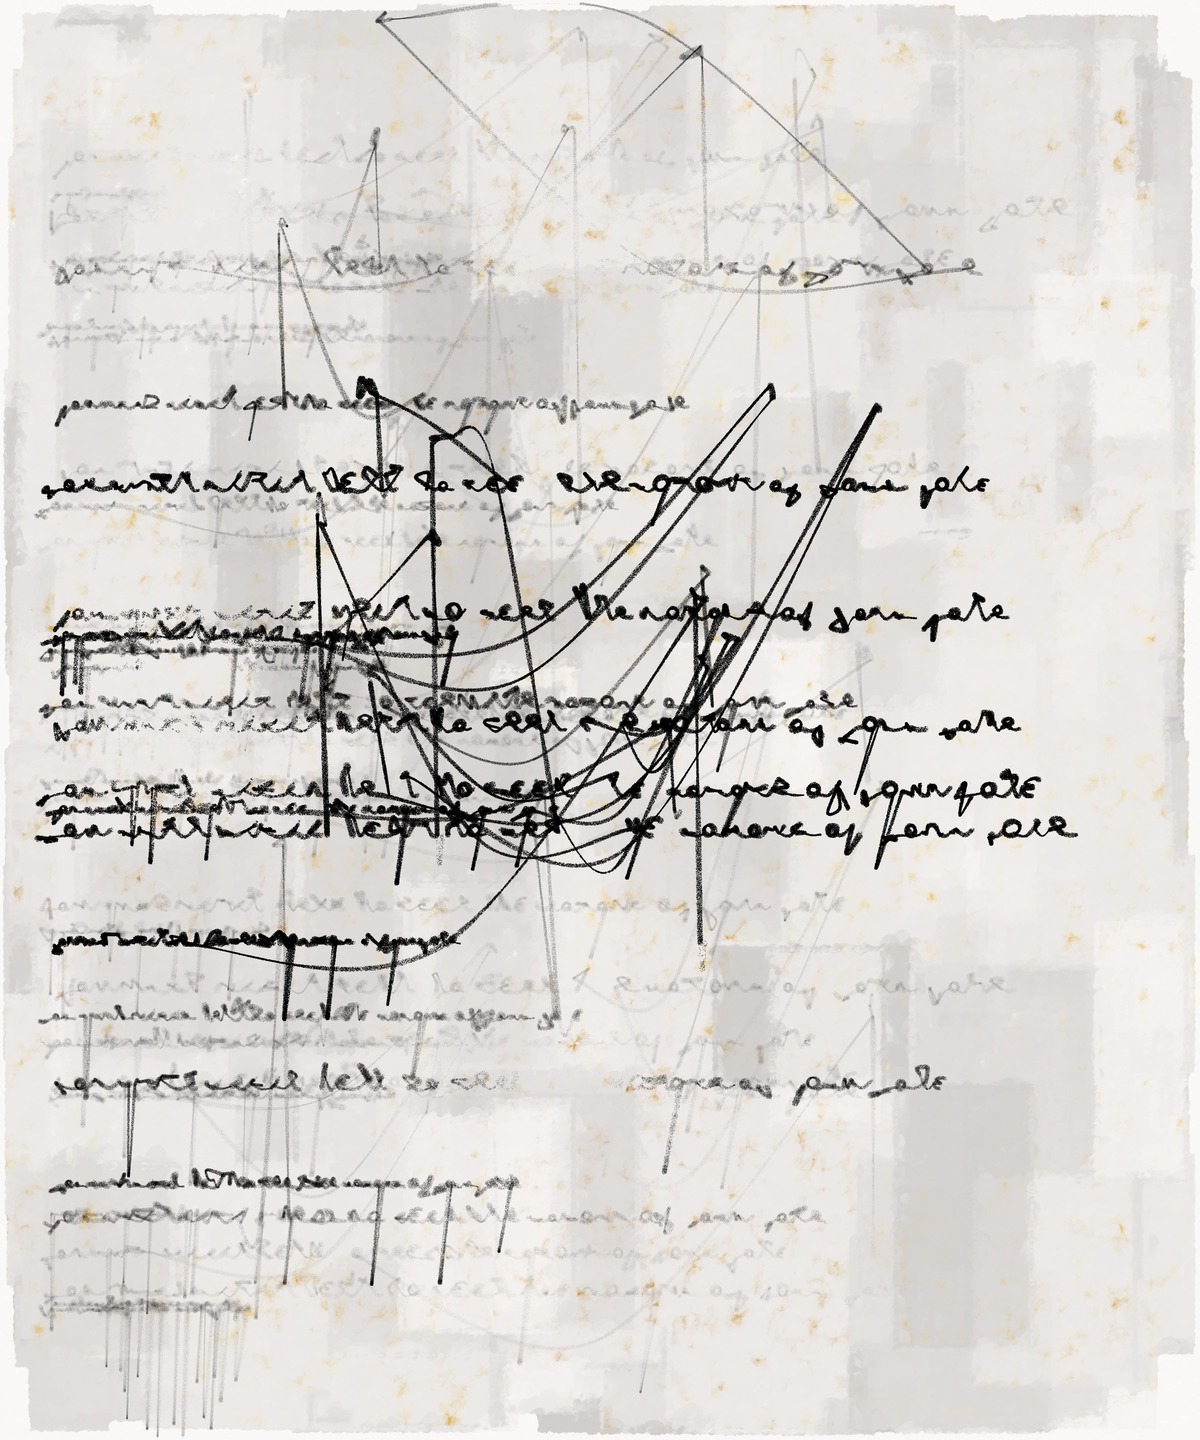 A digital image of a faded piece of paper with pale gray square patches, overlaid with lines of inky black asemic text